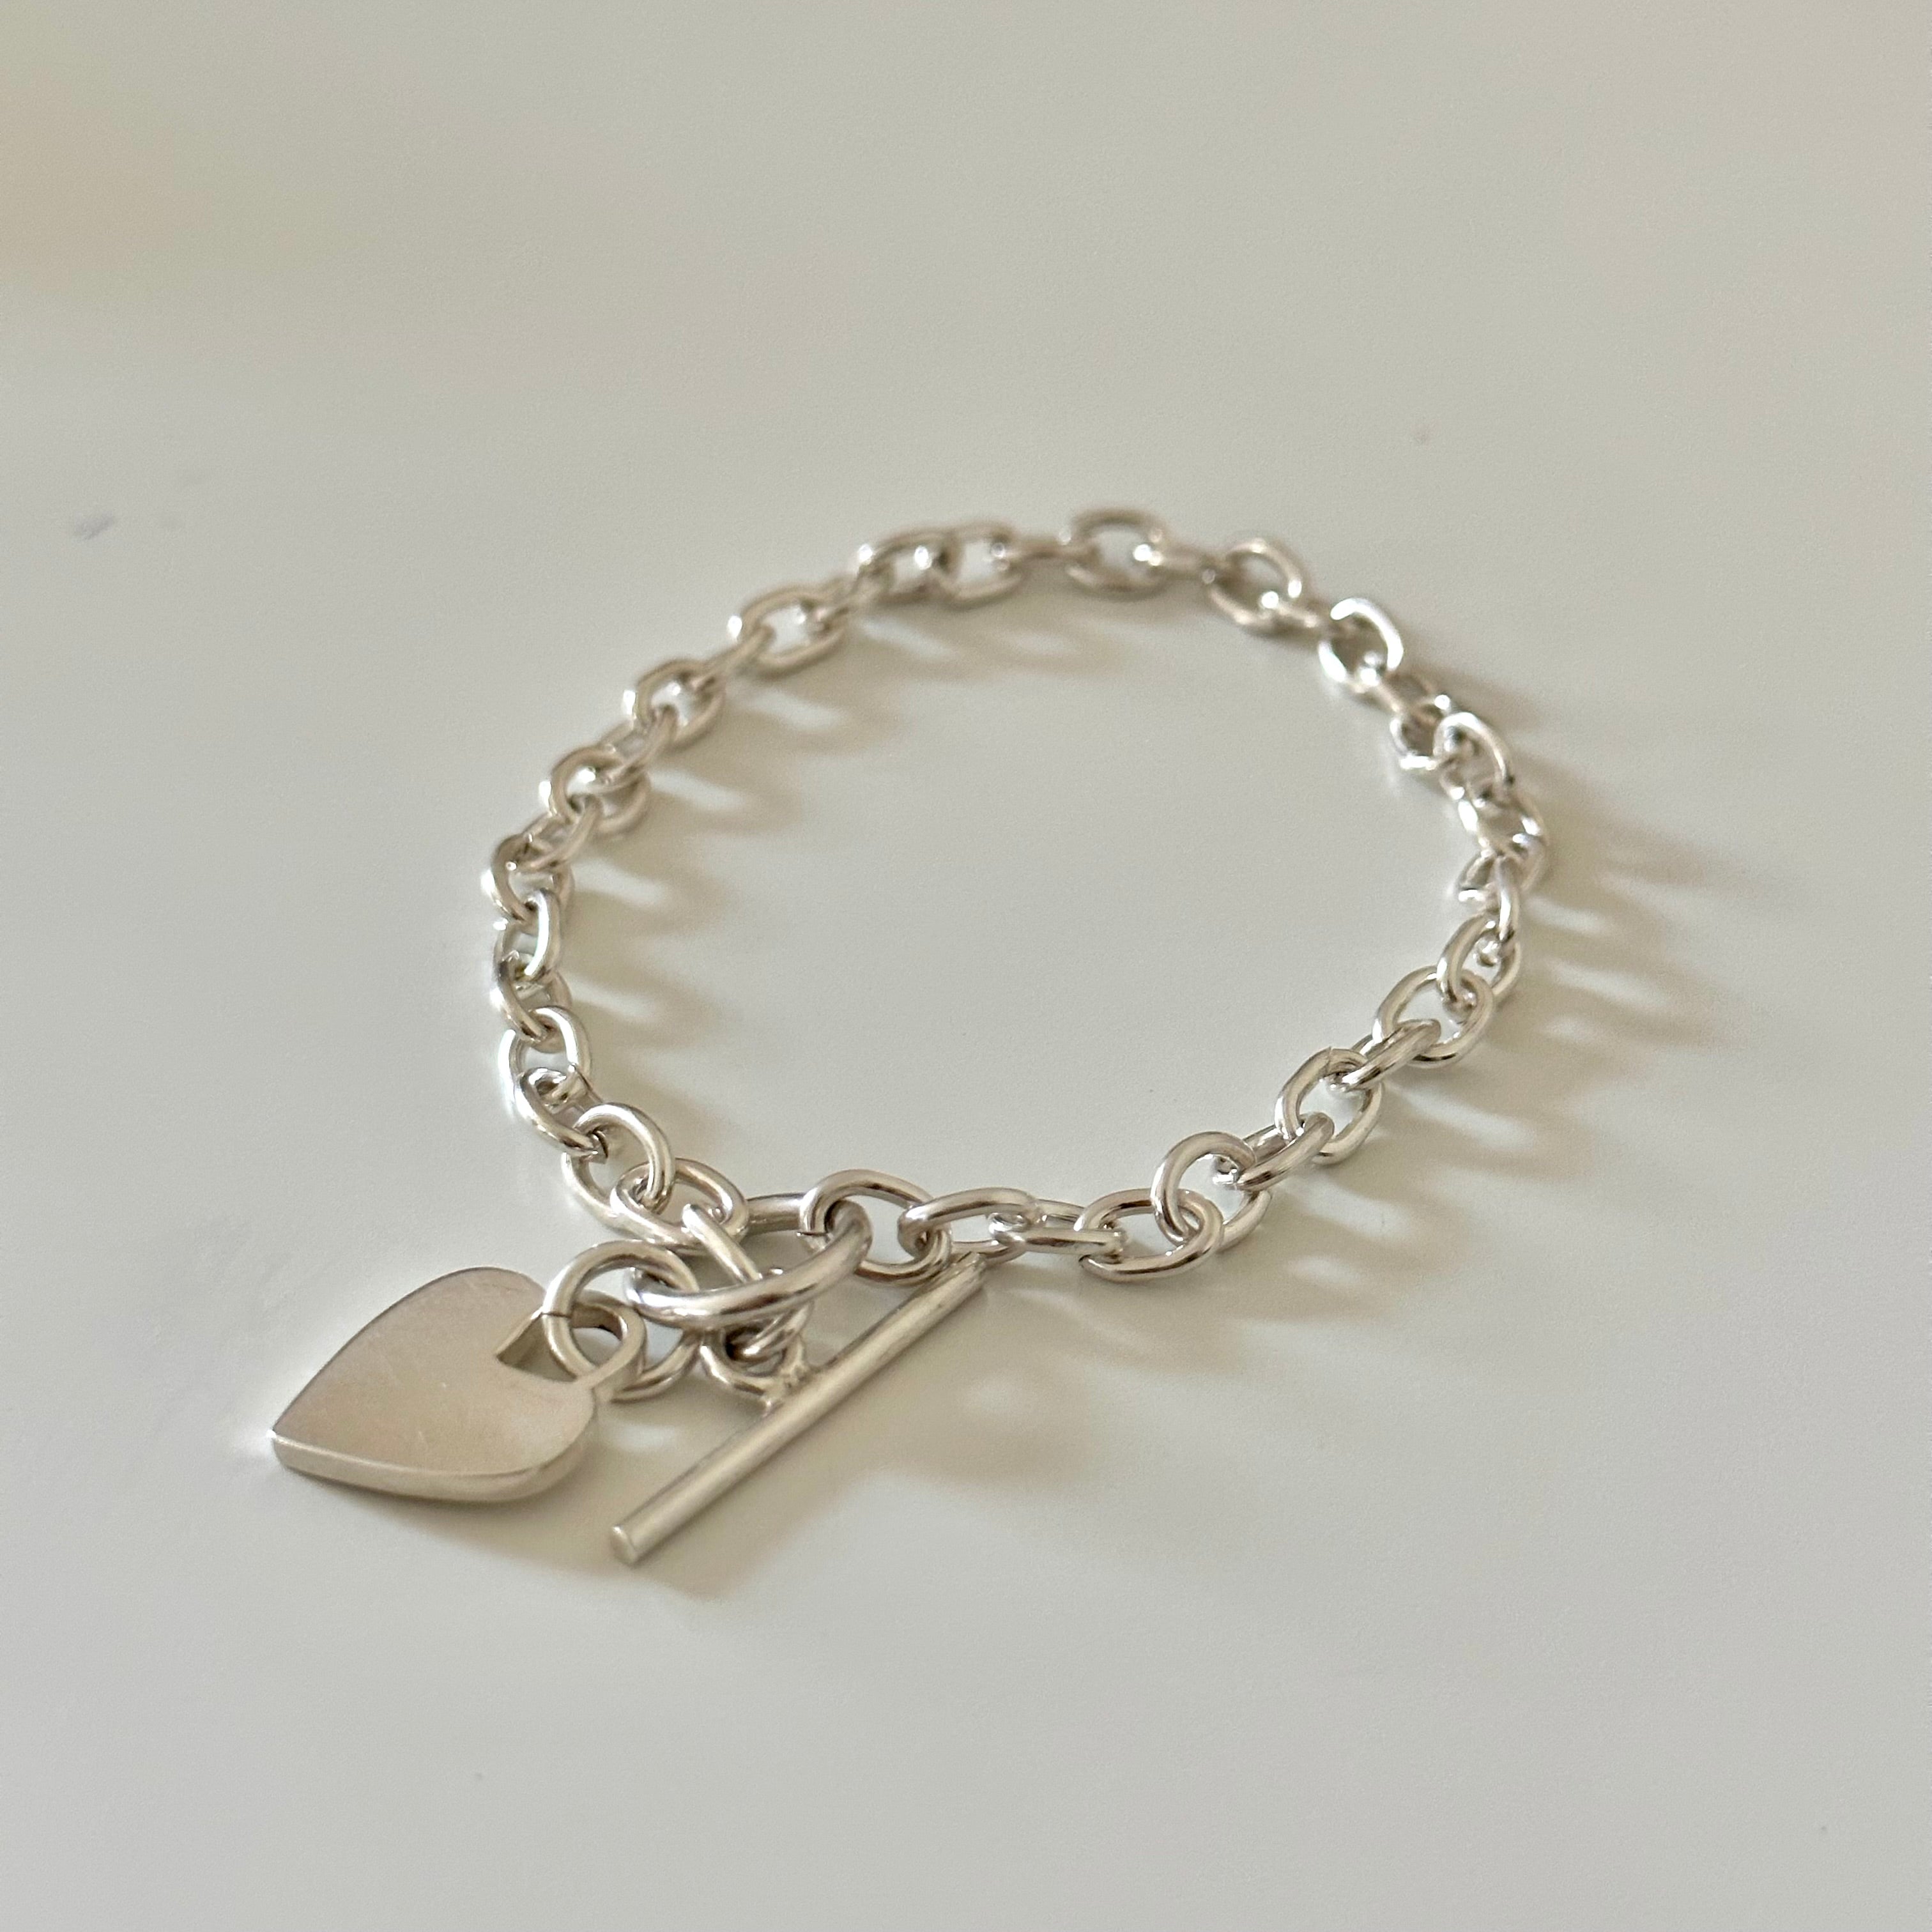 Sterling Silver Bracelet with Fine Oval Links and a Heart Charm